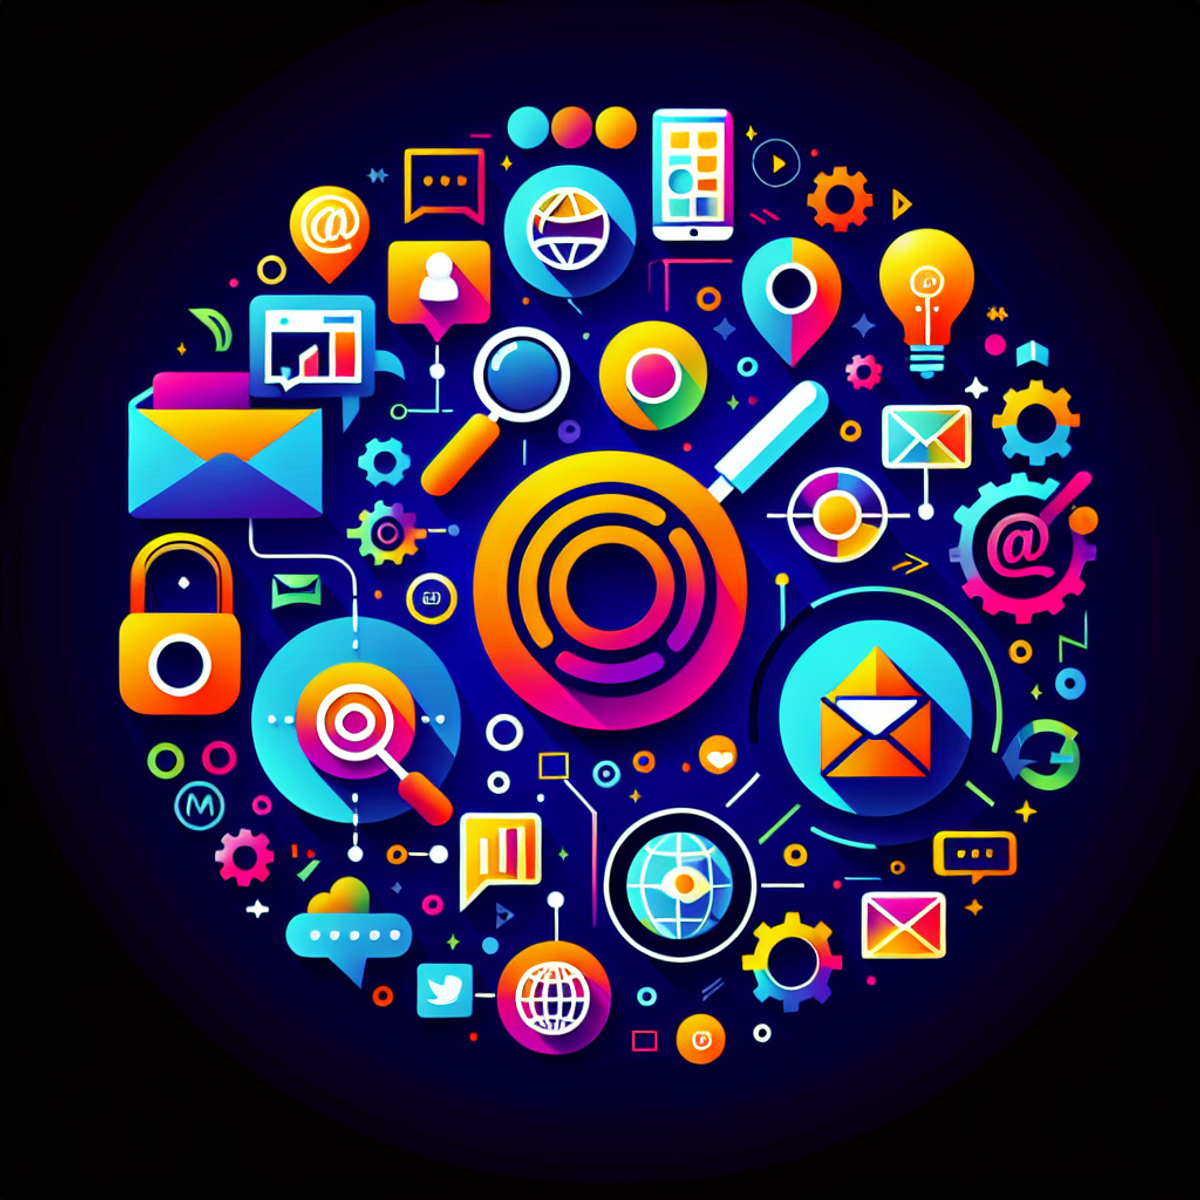 A vibrant and dynamic digital marketing campaign image featuring symbolic representations of search engine, social media, email marketing, and website channels.